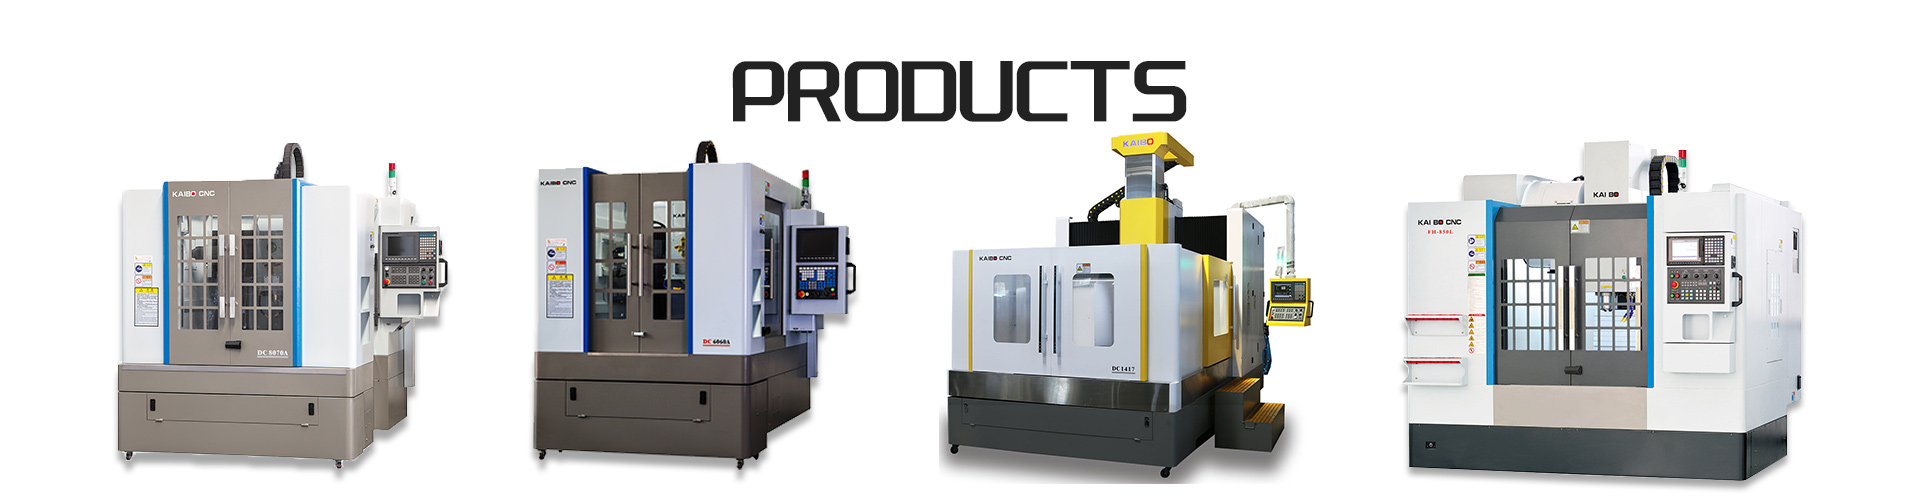 Products Archives - CNC Milling Machine,Vertical Machine Center,Milling Machine For Metal